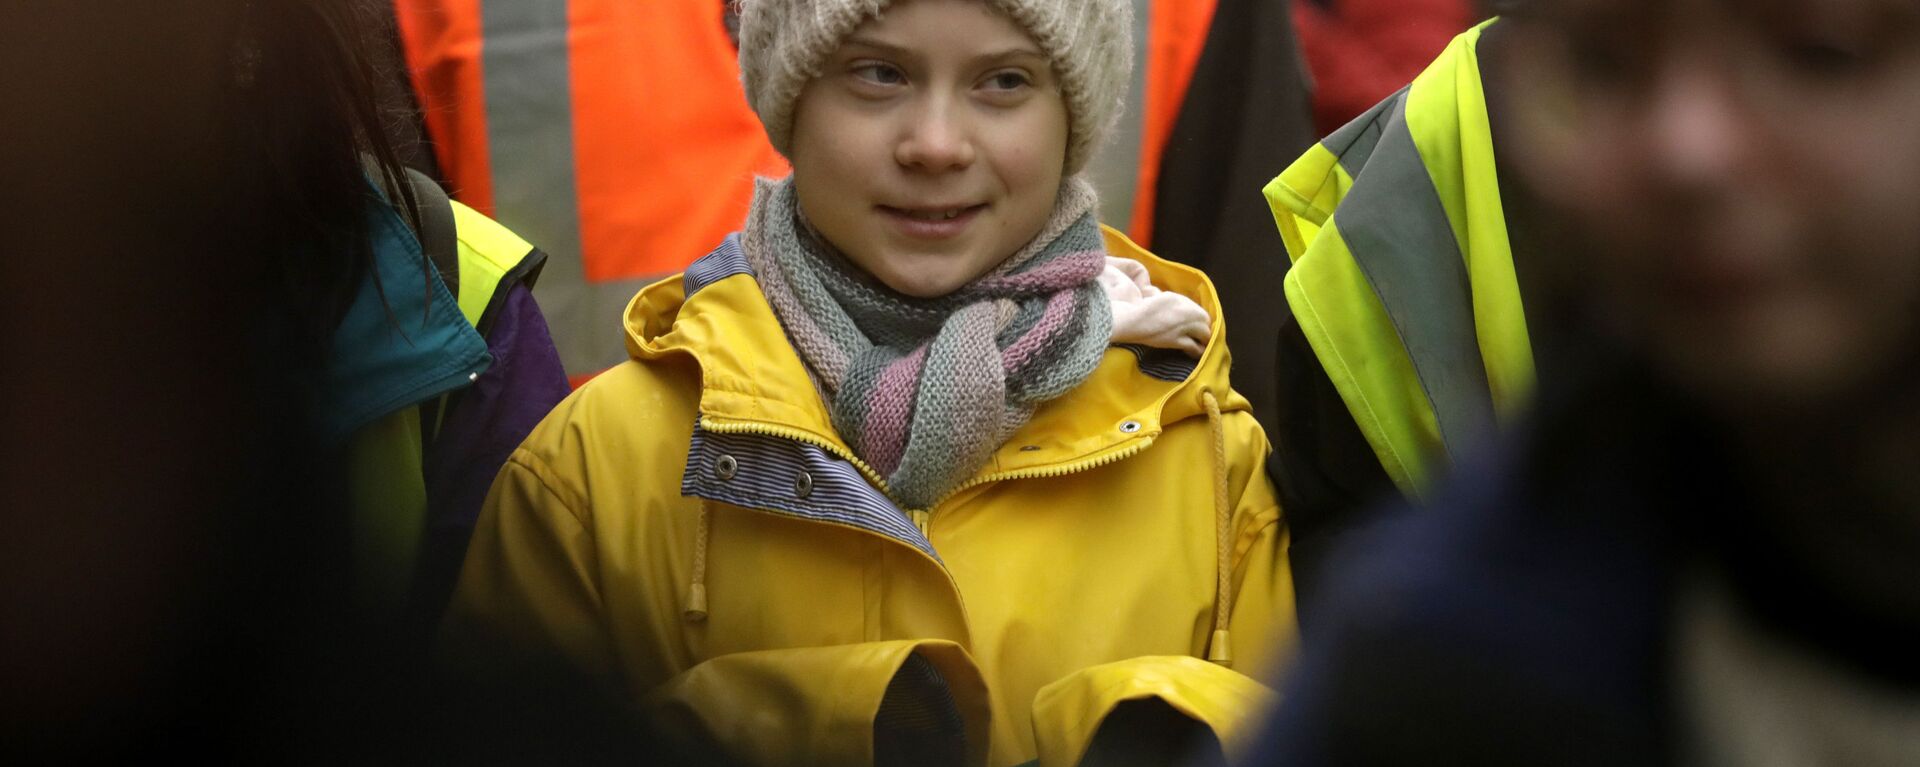 Climate activist Greta Thunberg, from Sweden marches with other demonstrators as she participates in a school strike climate protest in Bristol, south west England, Friday, Feb. 28, 2020. - Sputnik International, 1920, 23.10.2020